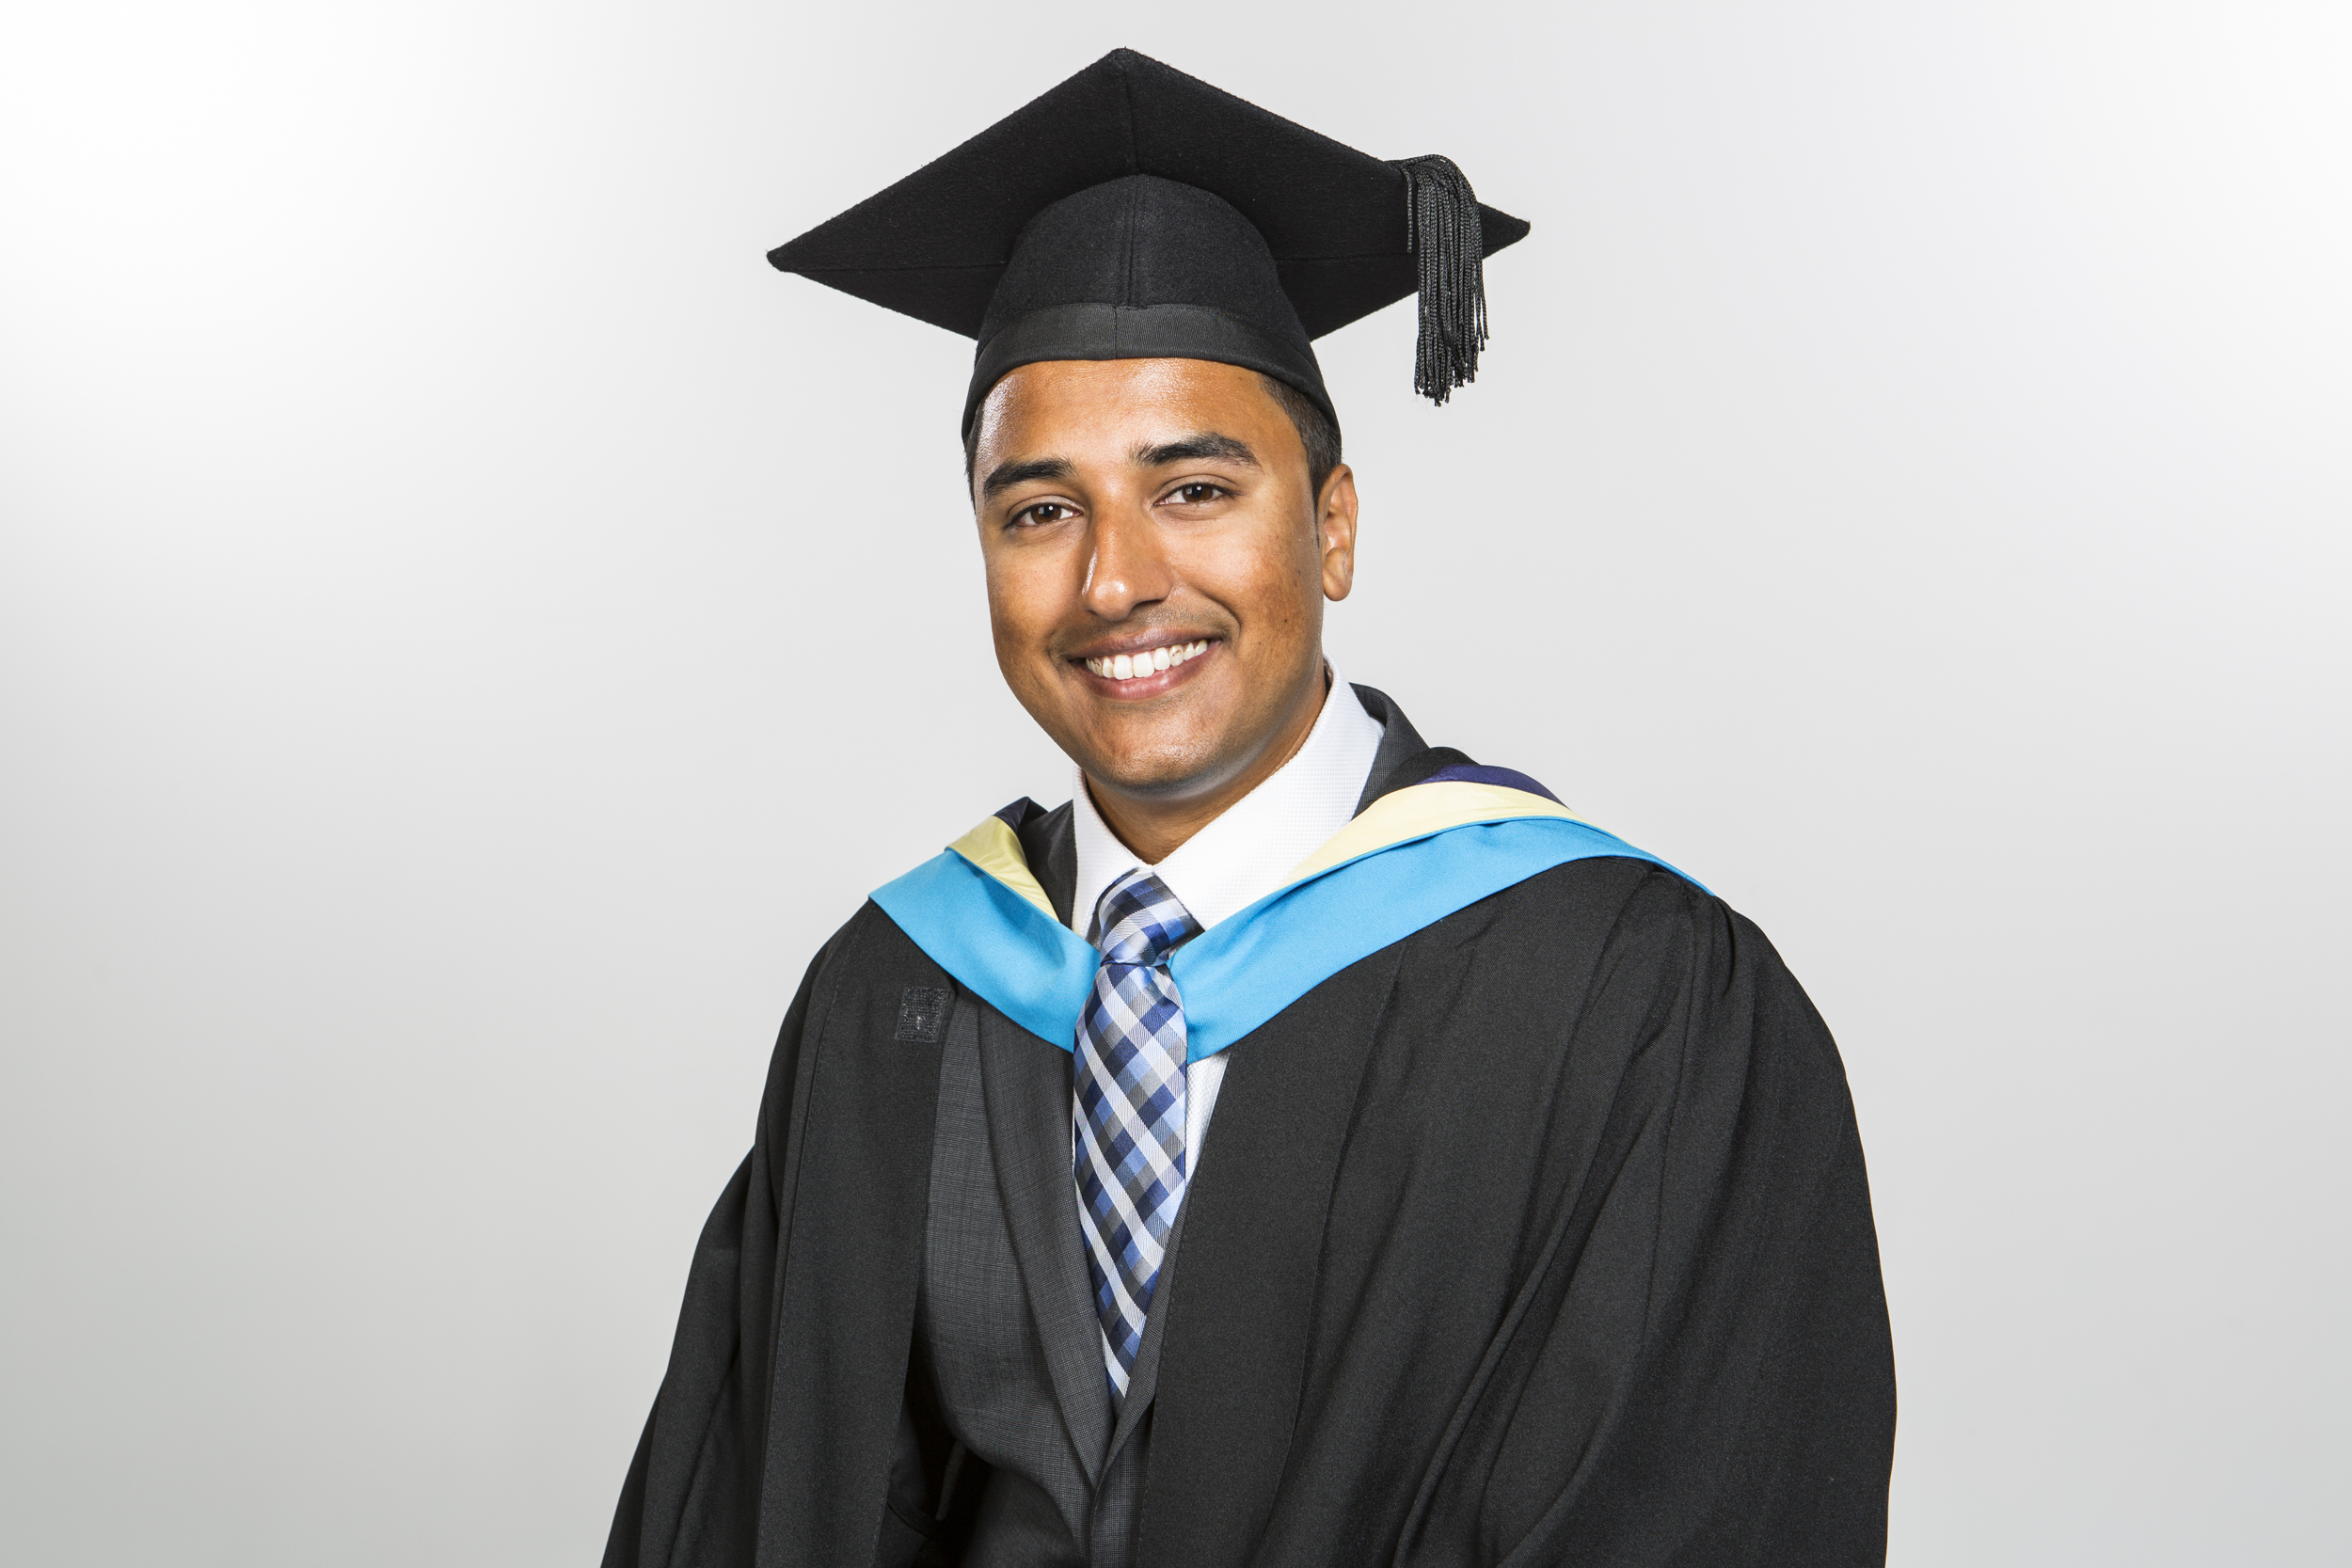 Male graduate having a professional photo taken in his graduation gown